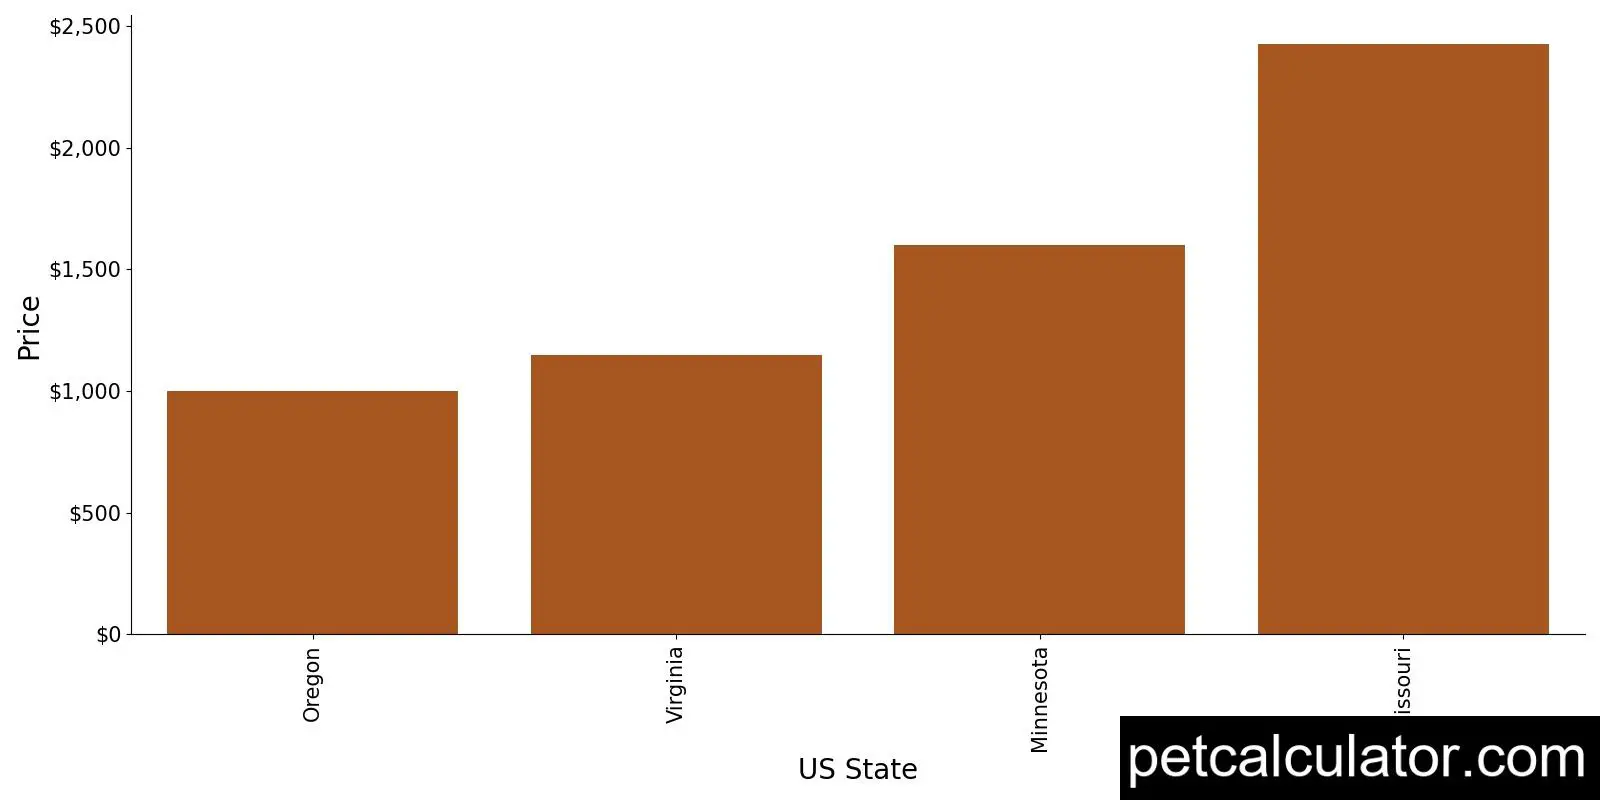 Price of Lakeland Terrier by US State 